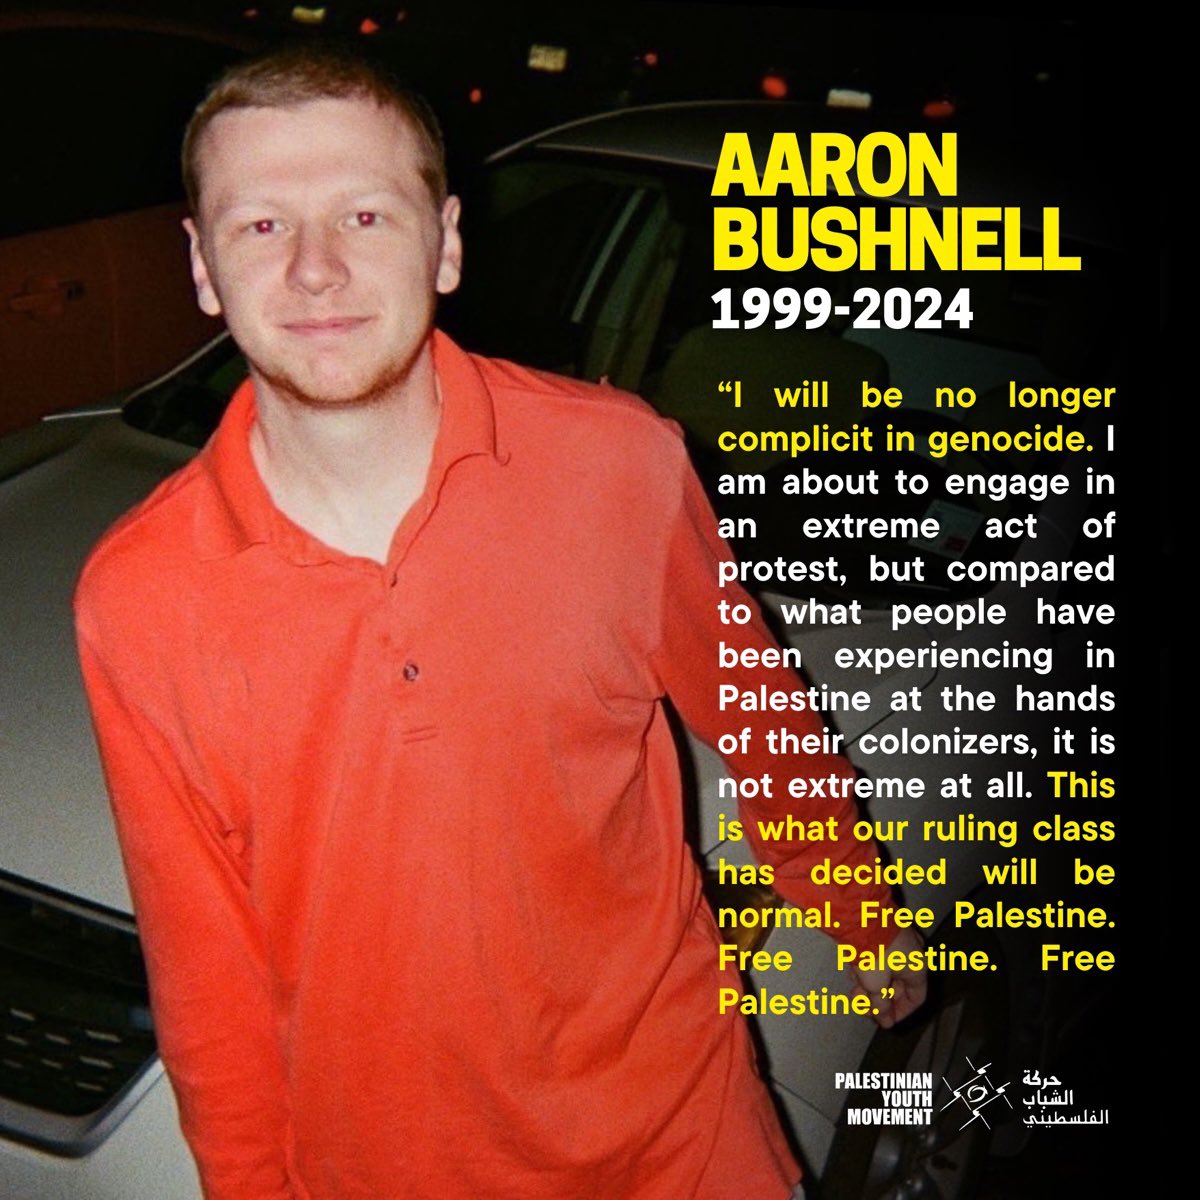 Today I'm thinking of Aaron Bushnell